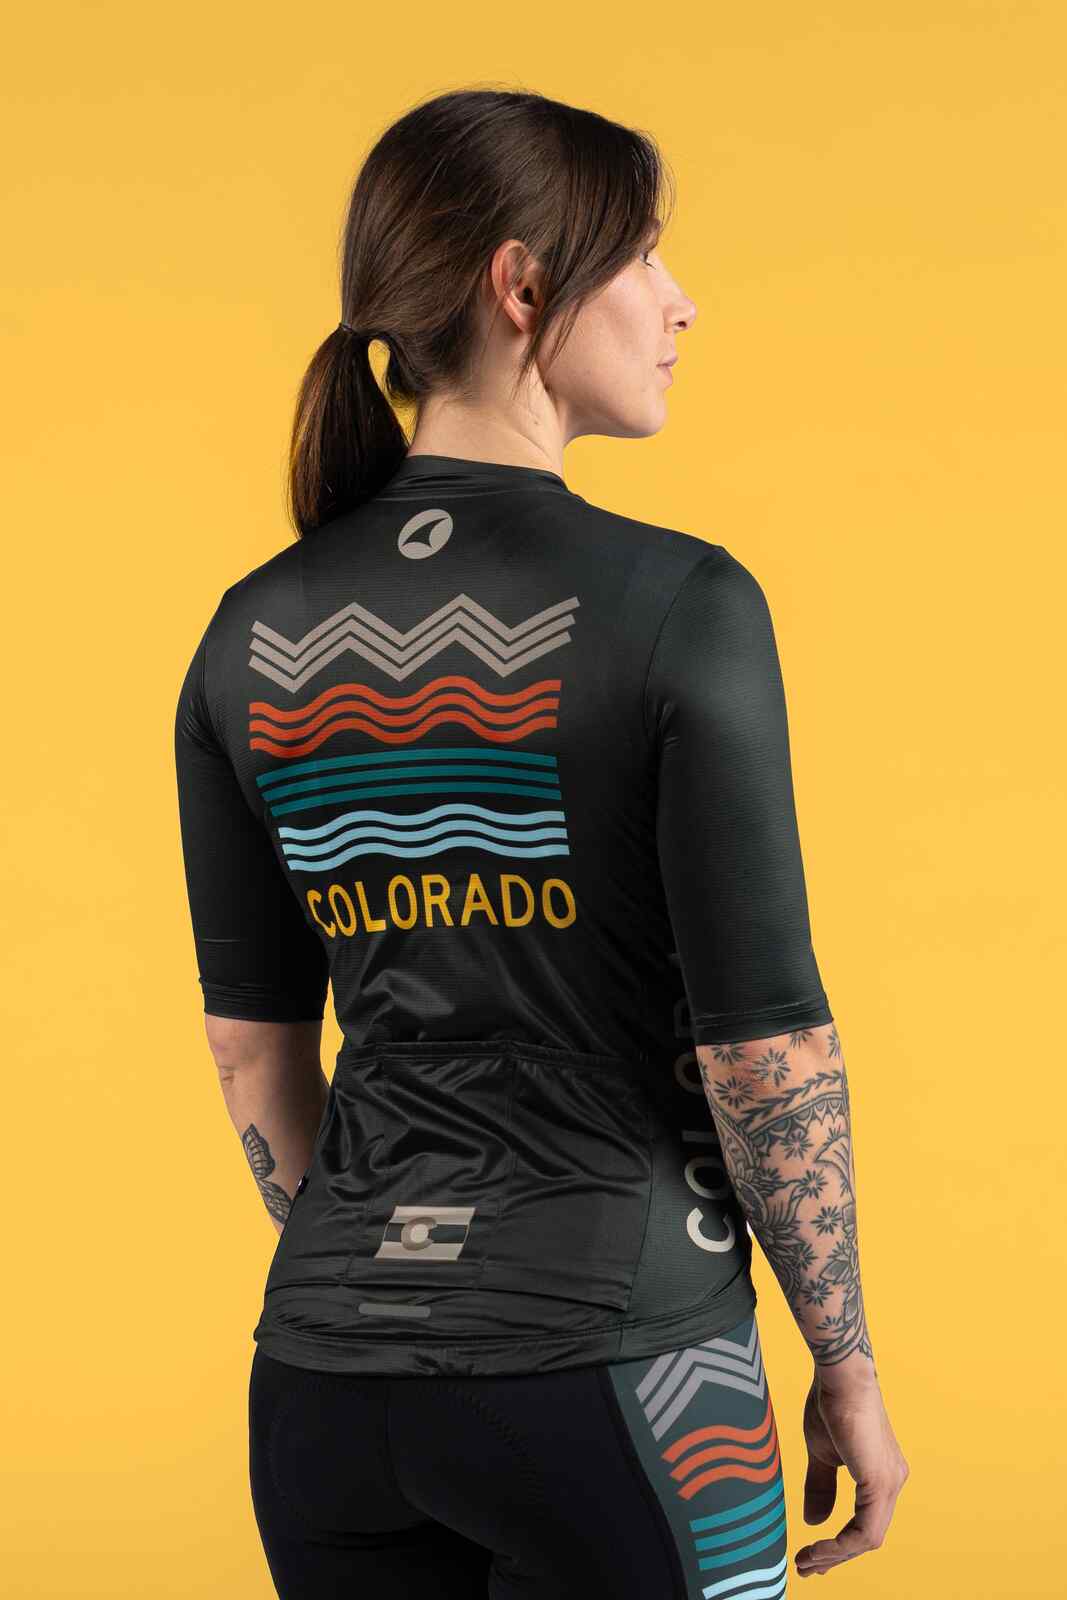 Women's Navy Blue Colorado Cycling Jersey - Back View